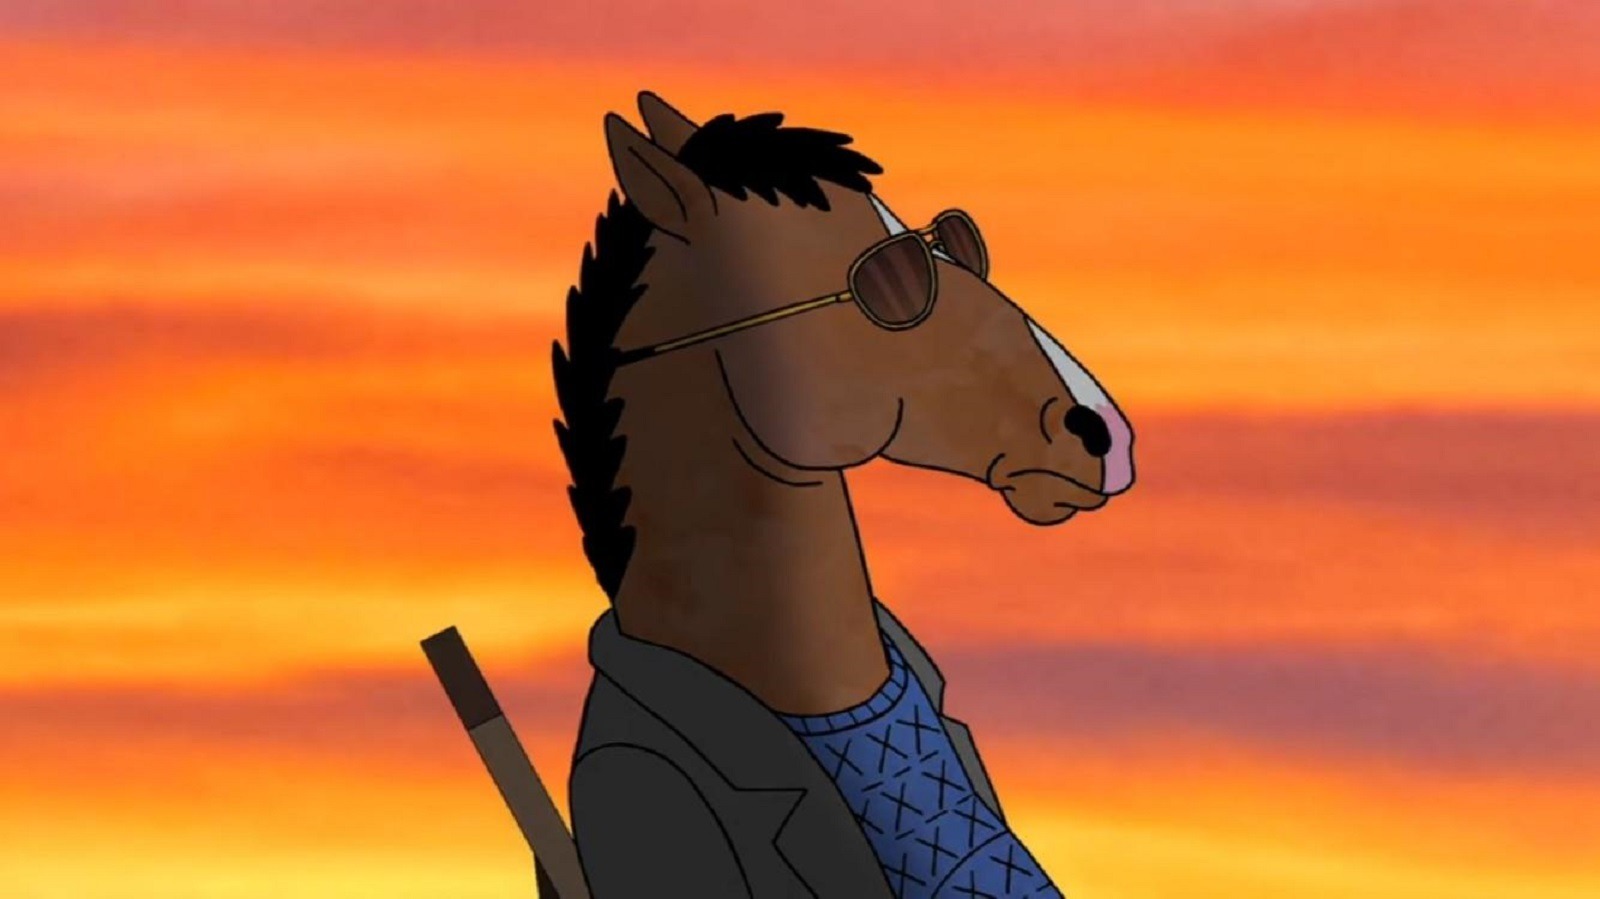 The Truth About The BoJack Horseman Theme Song.